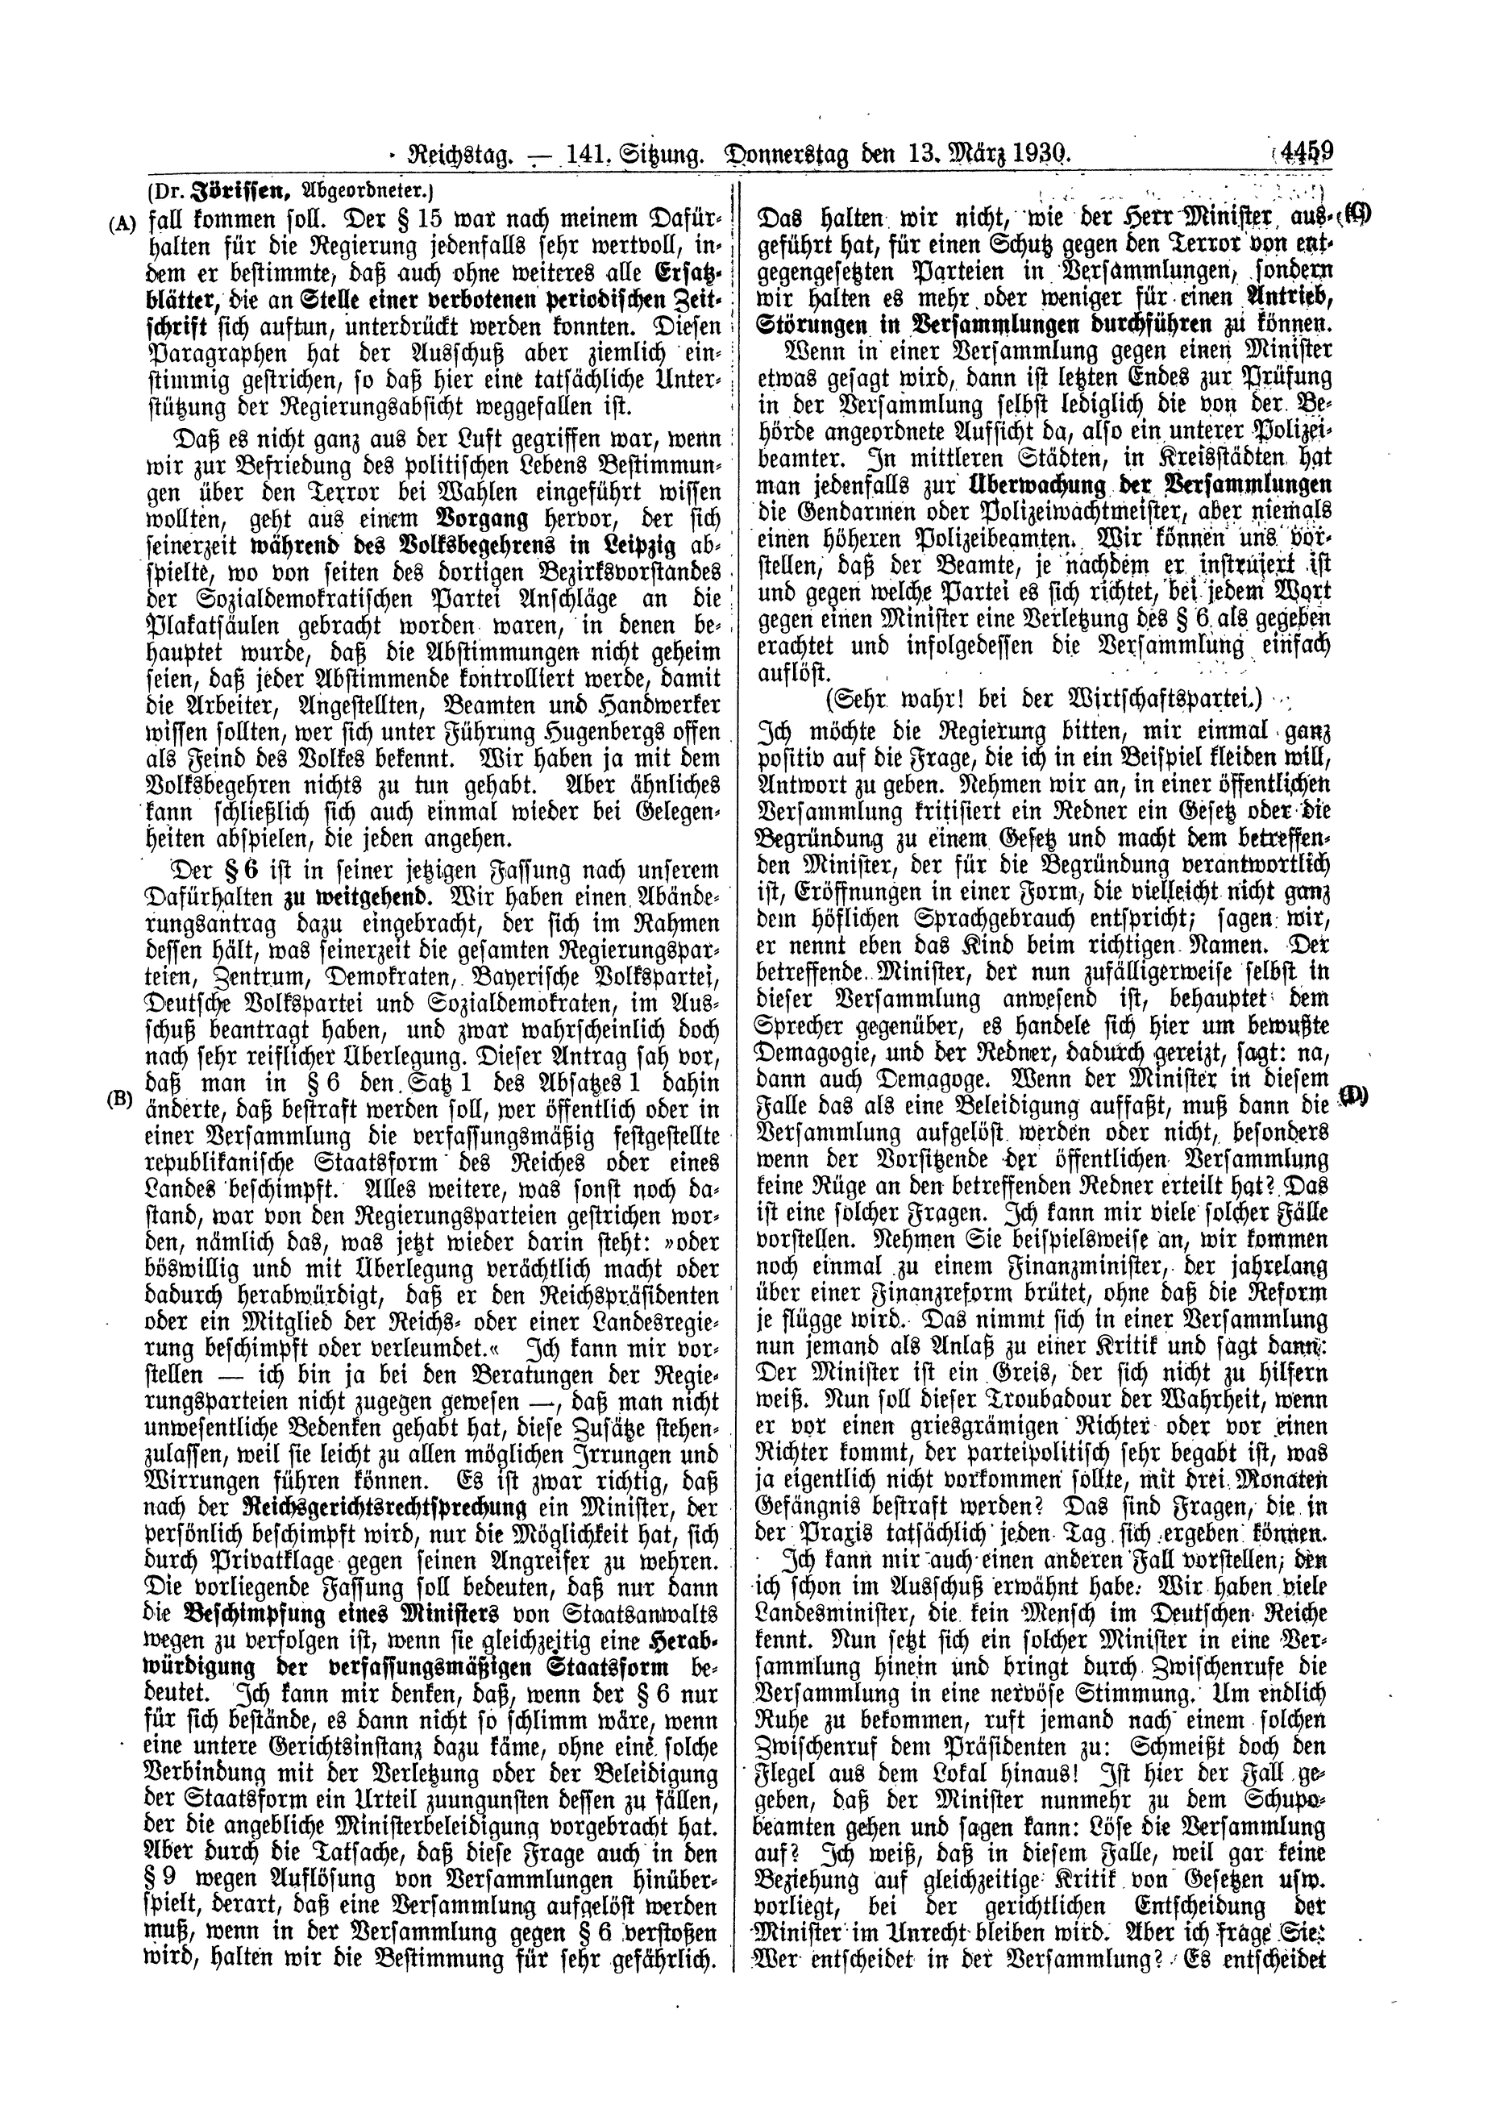 Scan of page 4459